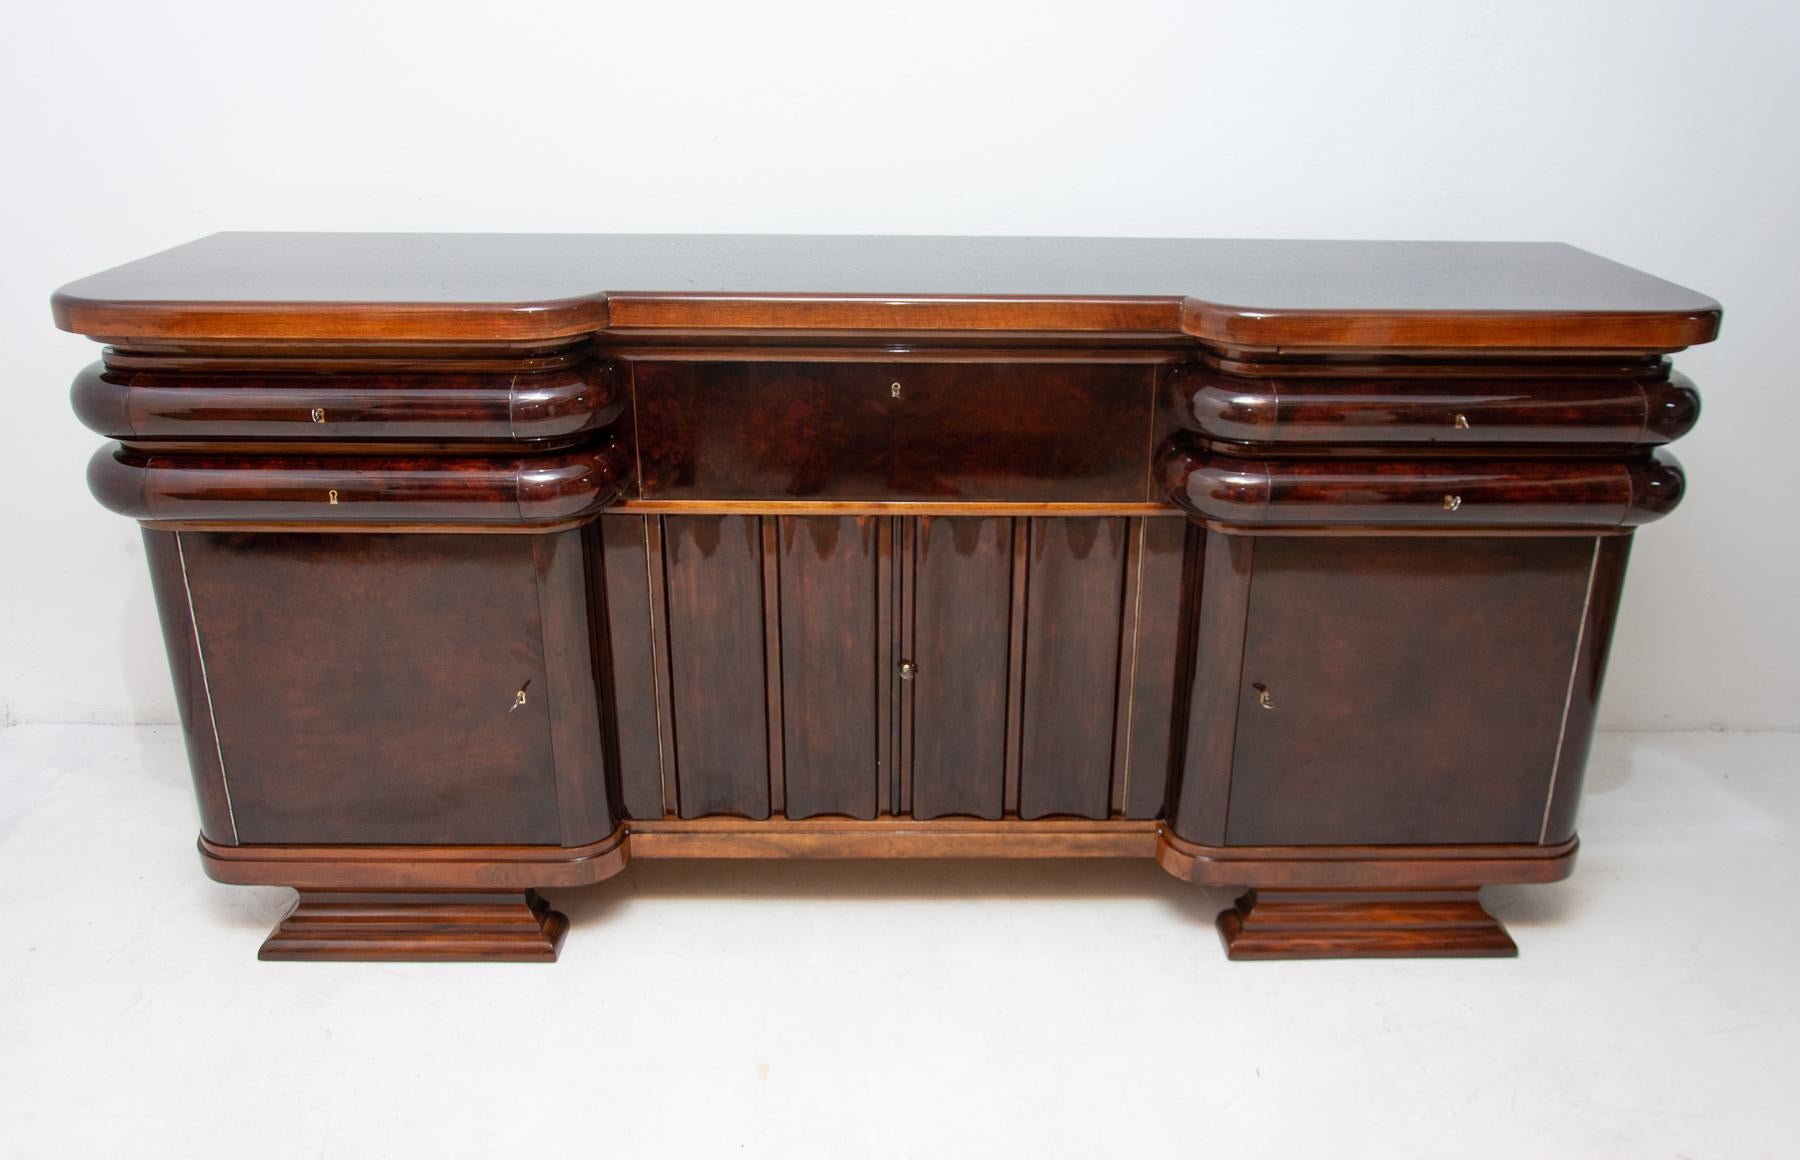 This exceptional sideboard or buffet was made in Bohemia in the 1930s by the famous local furniture company Jan Štícha-Líšov. It´s made of solid wood and veneered in walnut. It features a large storage space and unique rounded shapes of the